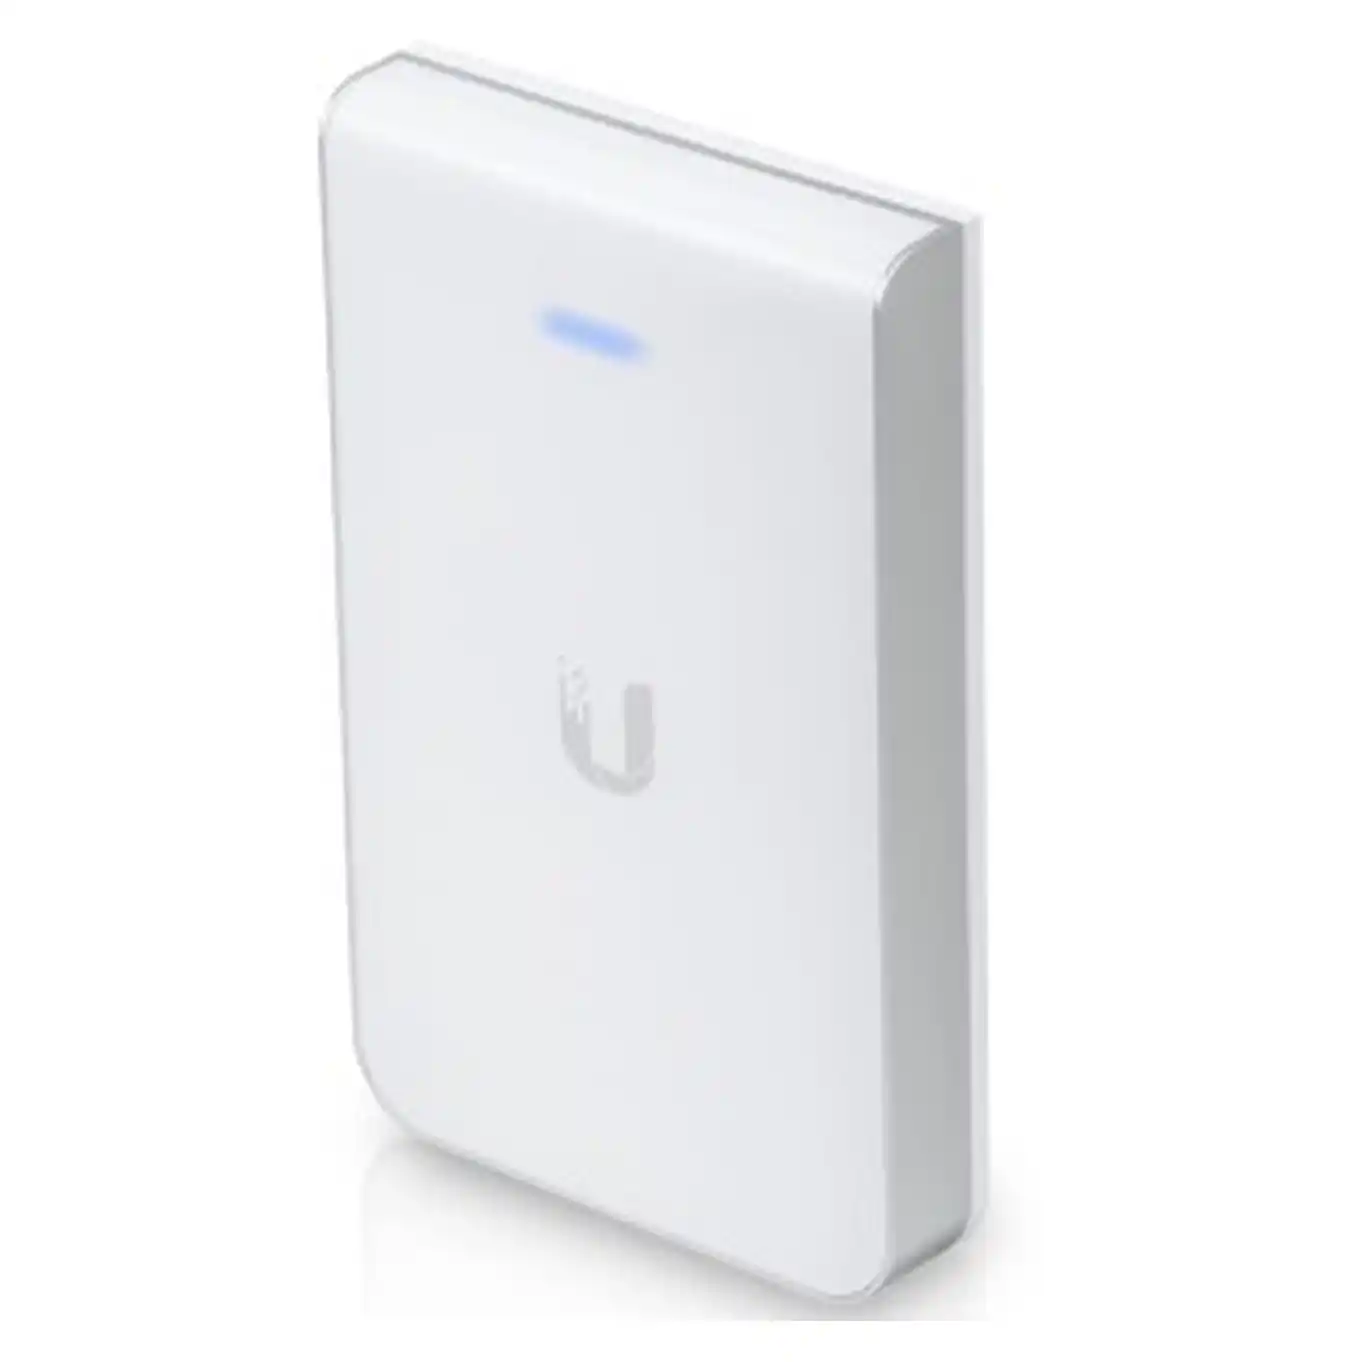 UAP-AC-IW-PRO-5 UniFi AP, AC, In Wall, Pro, 5-Pack